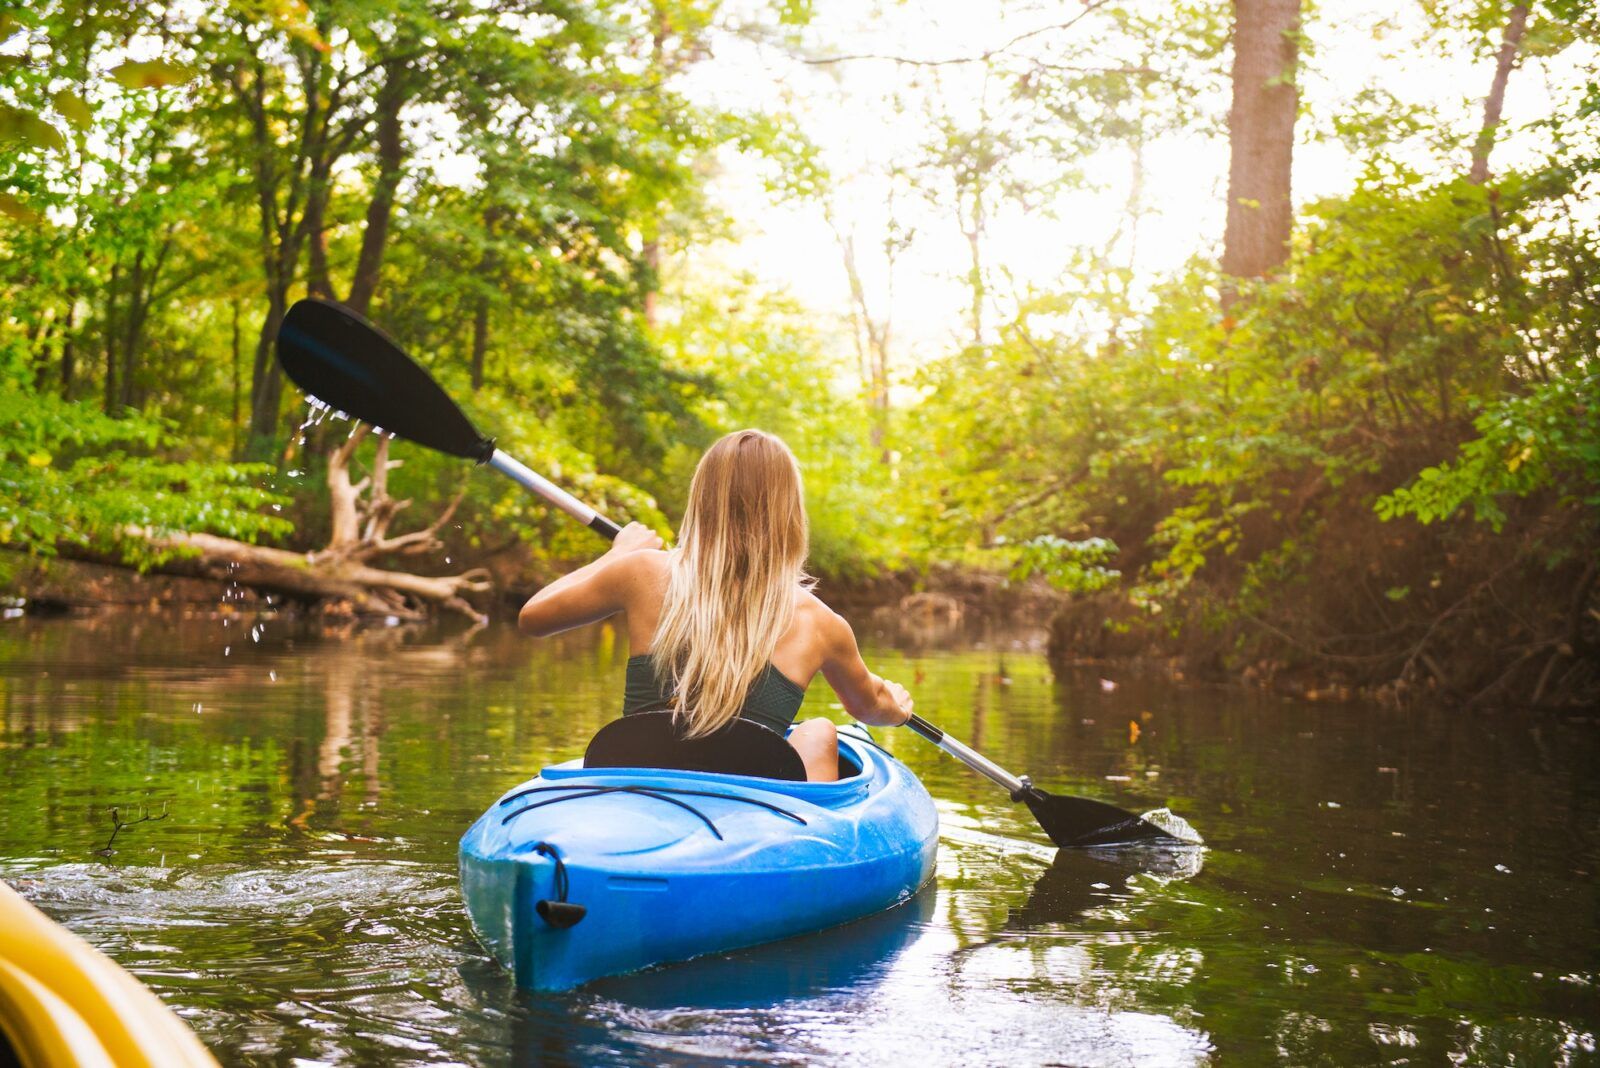 Rear view of young woman kayaking on forest river, Cary, North Carolina, USA